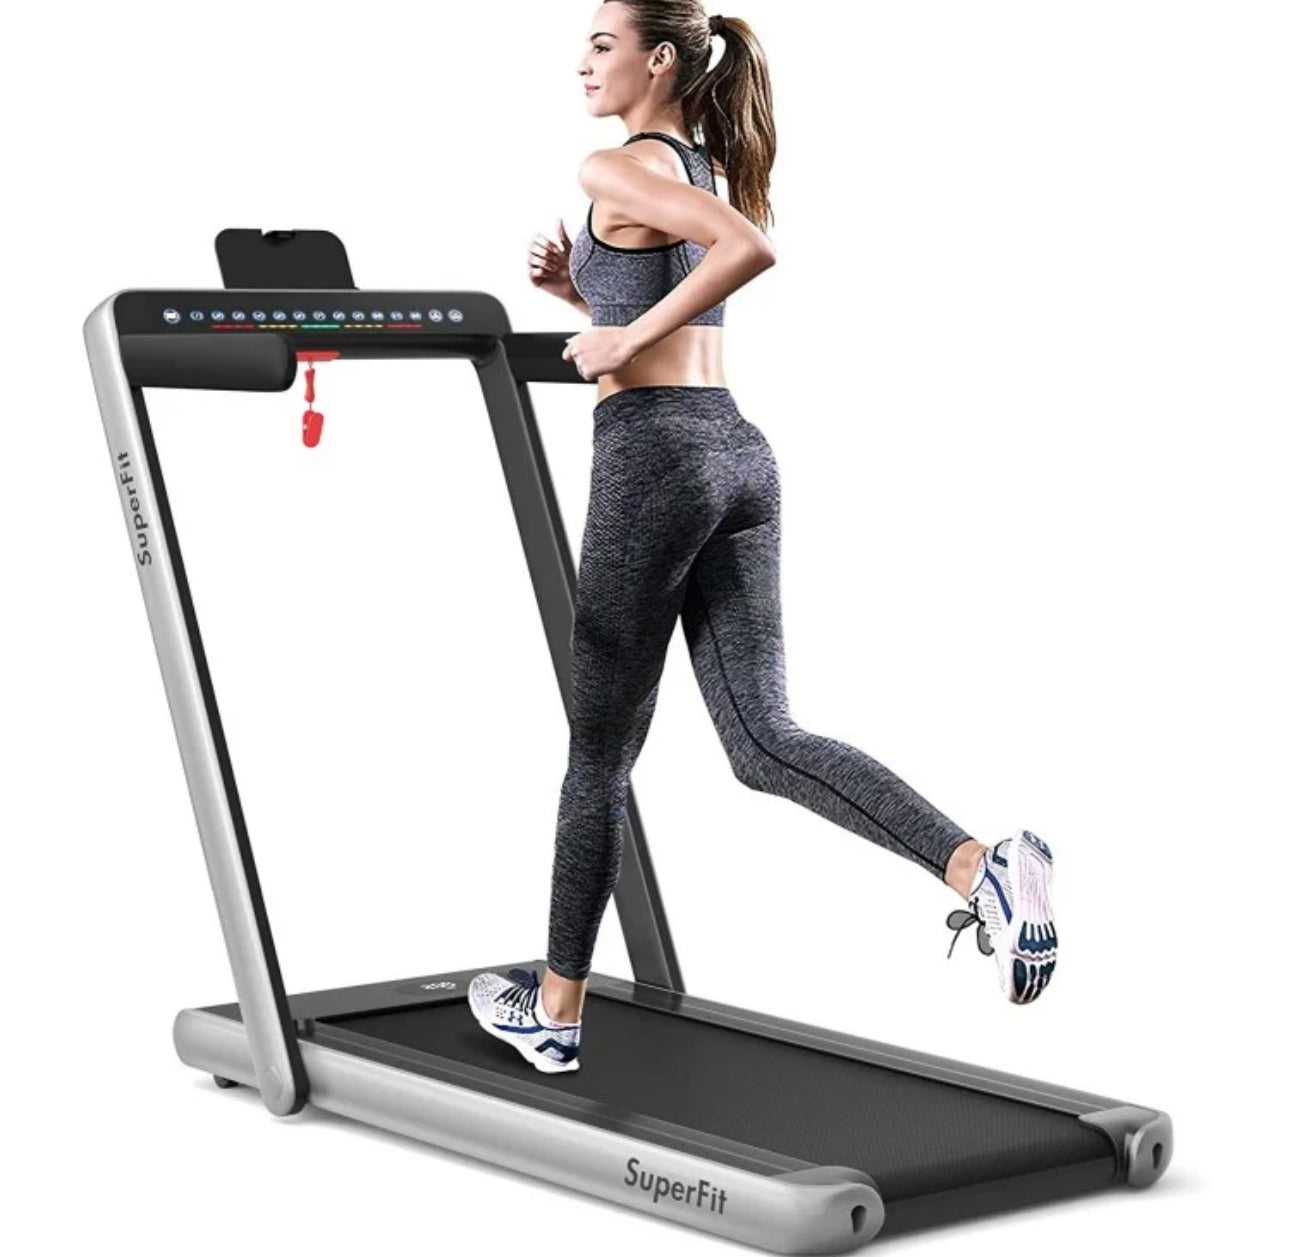 Heavy Duty Modern 2.25HP 2-in-1 Foldable Walking Pad Treadmill With Dual Display | App Control | Space Saver | Quiet Motor | High Performance Speaker | Remote Control